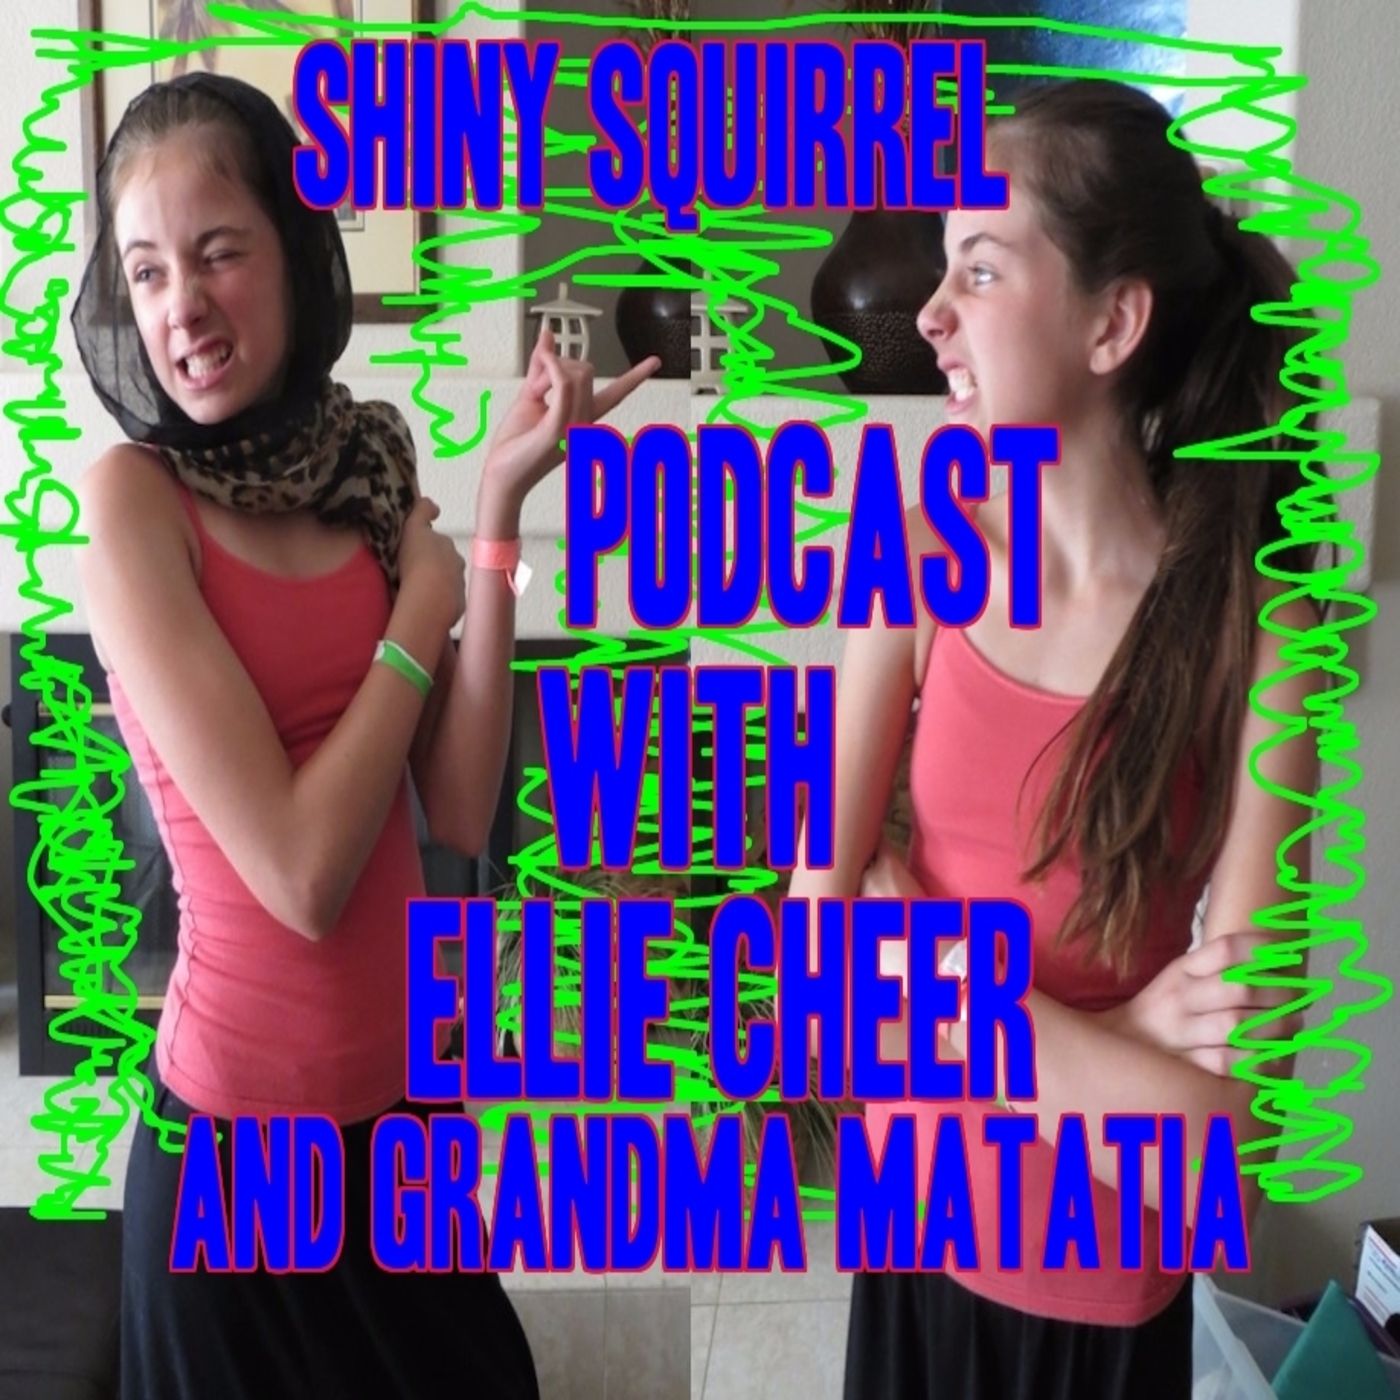 EPISODE 182 E TICKET WITH OLIVIA KWOOOKIE: WE SCARE BECAUSE WE CARE